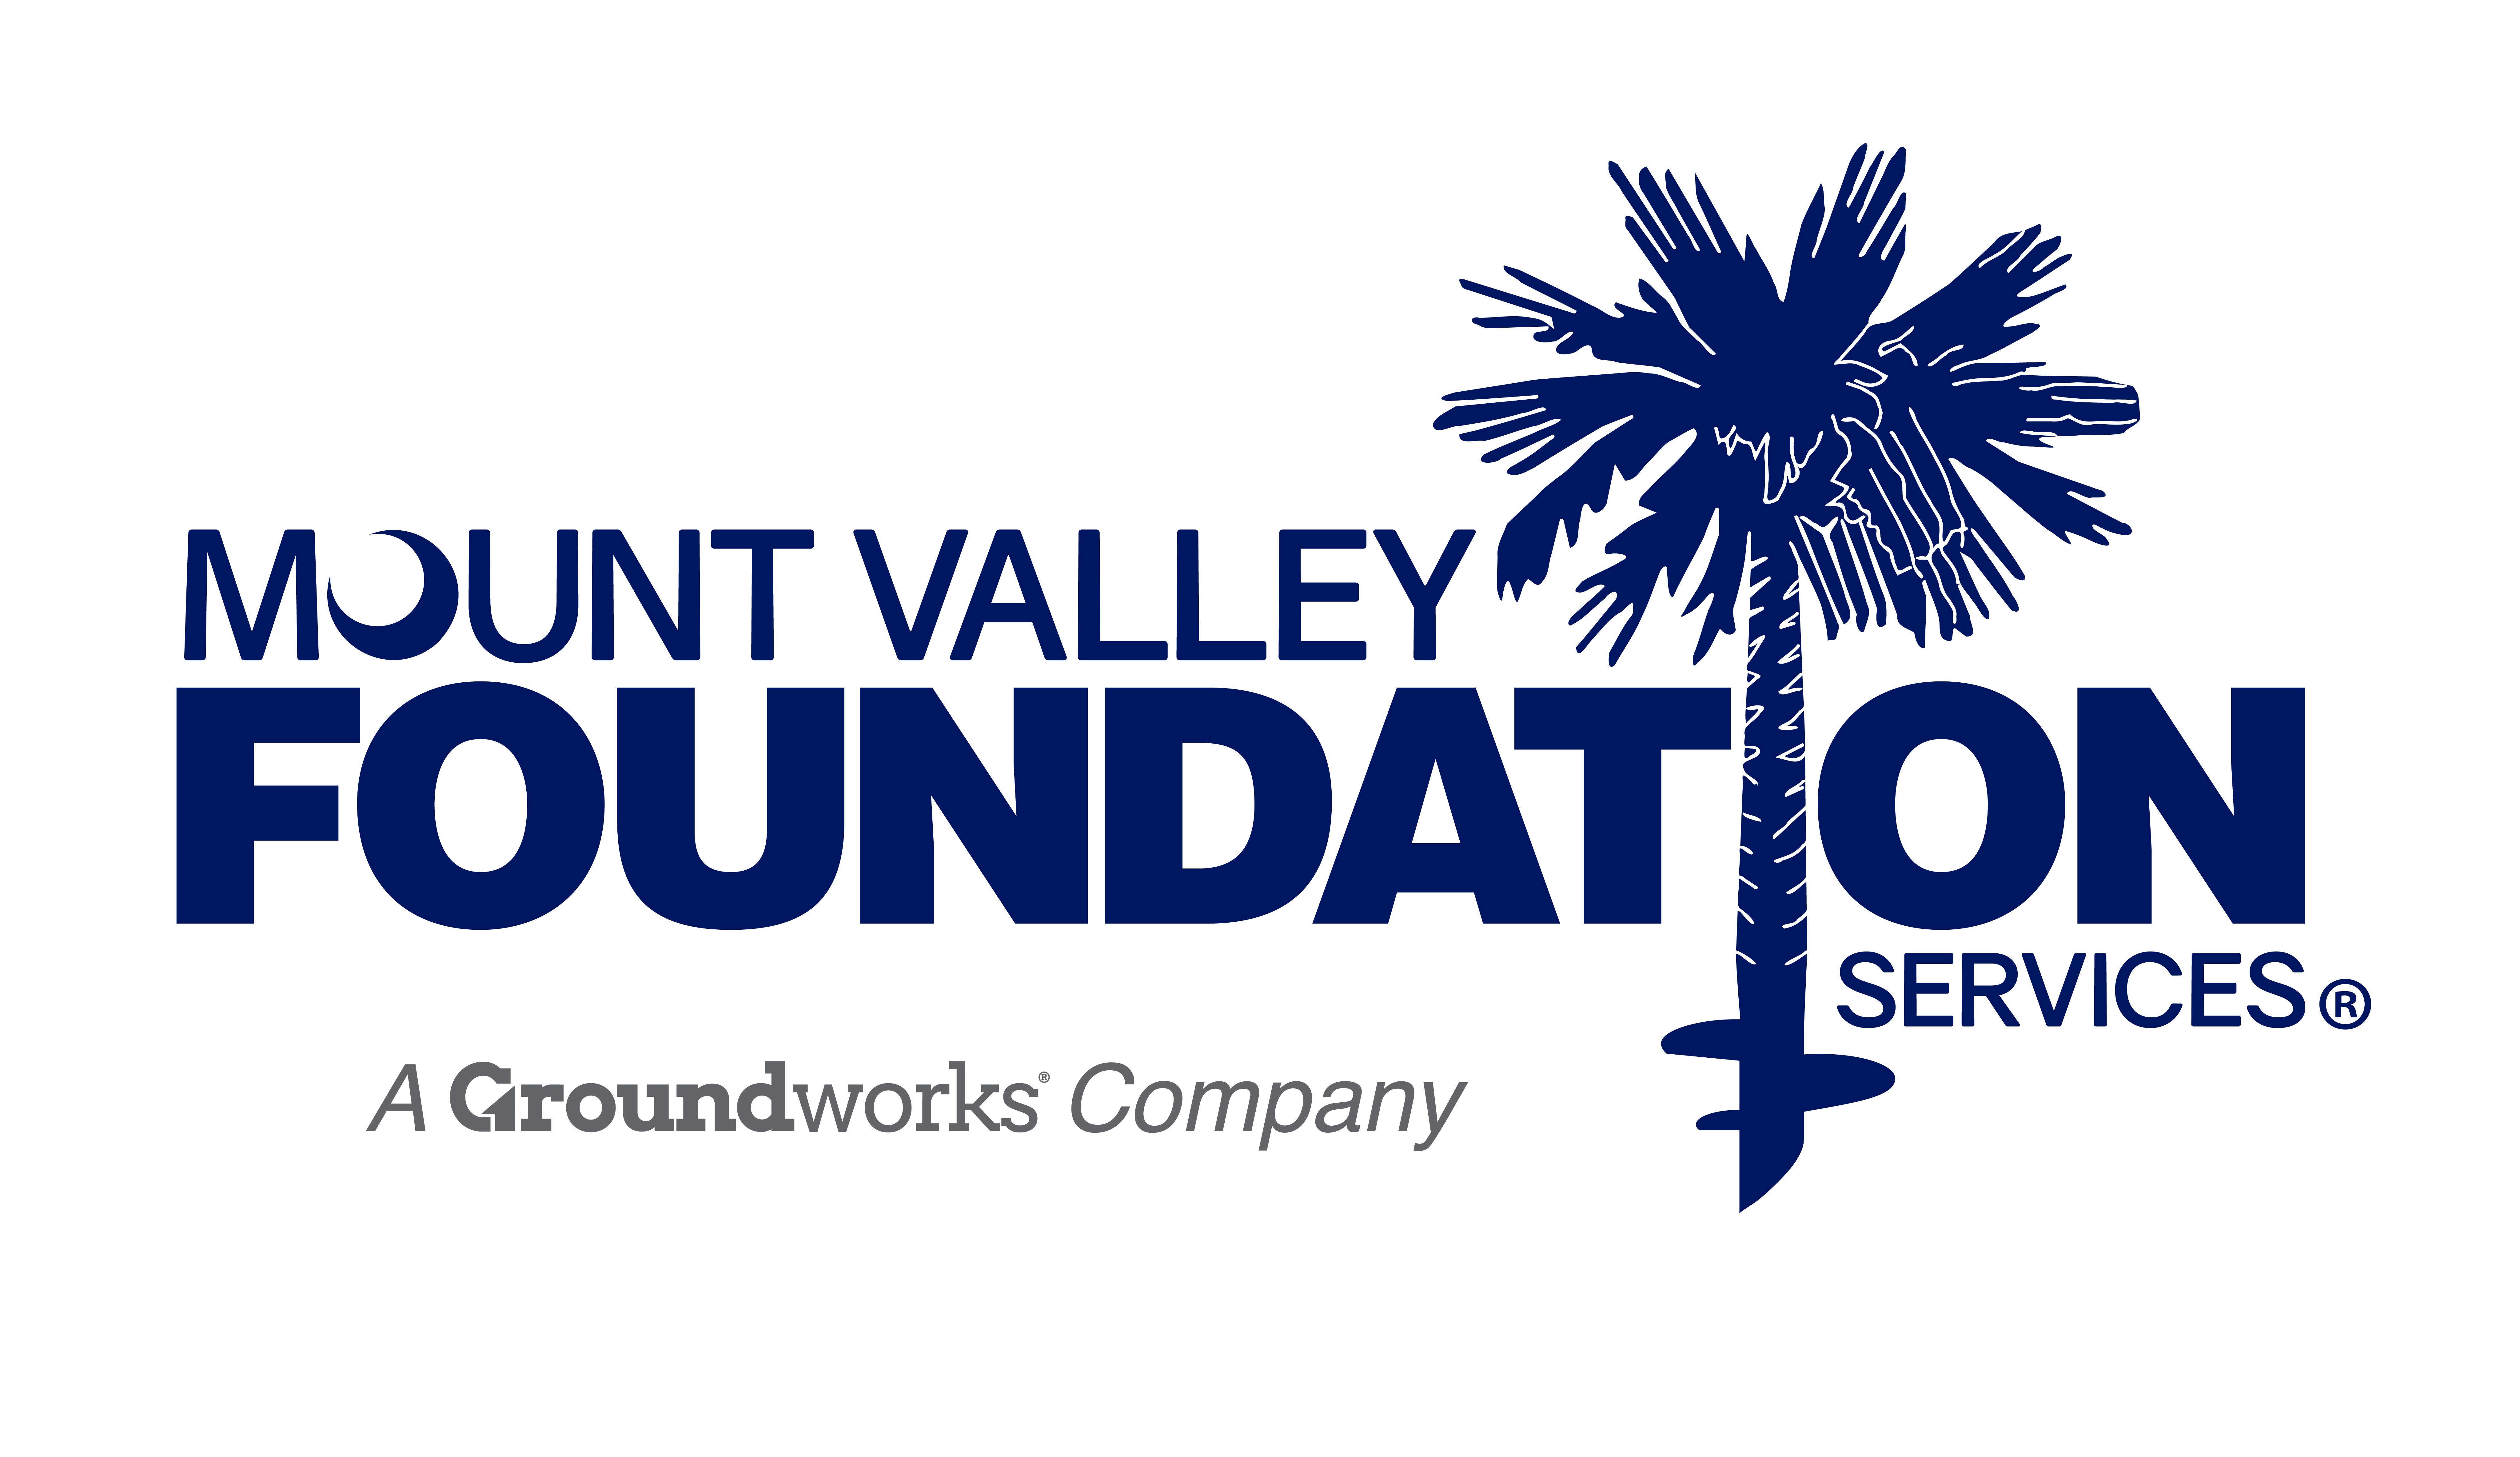 Mount Valley Foundation Services Logo